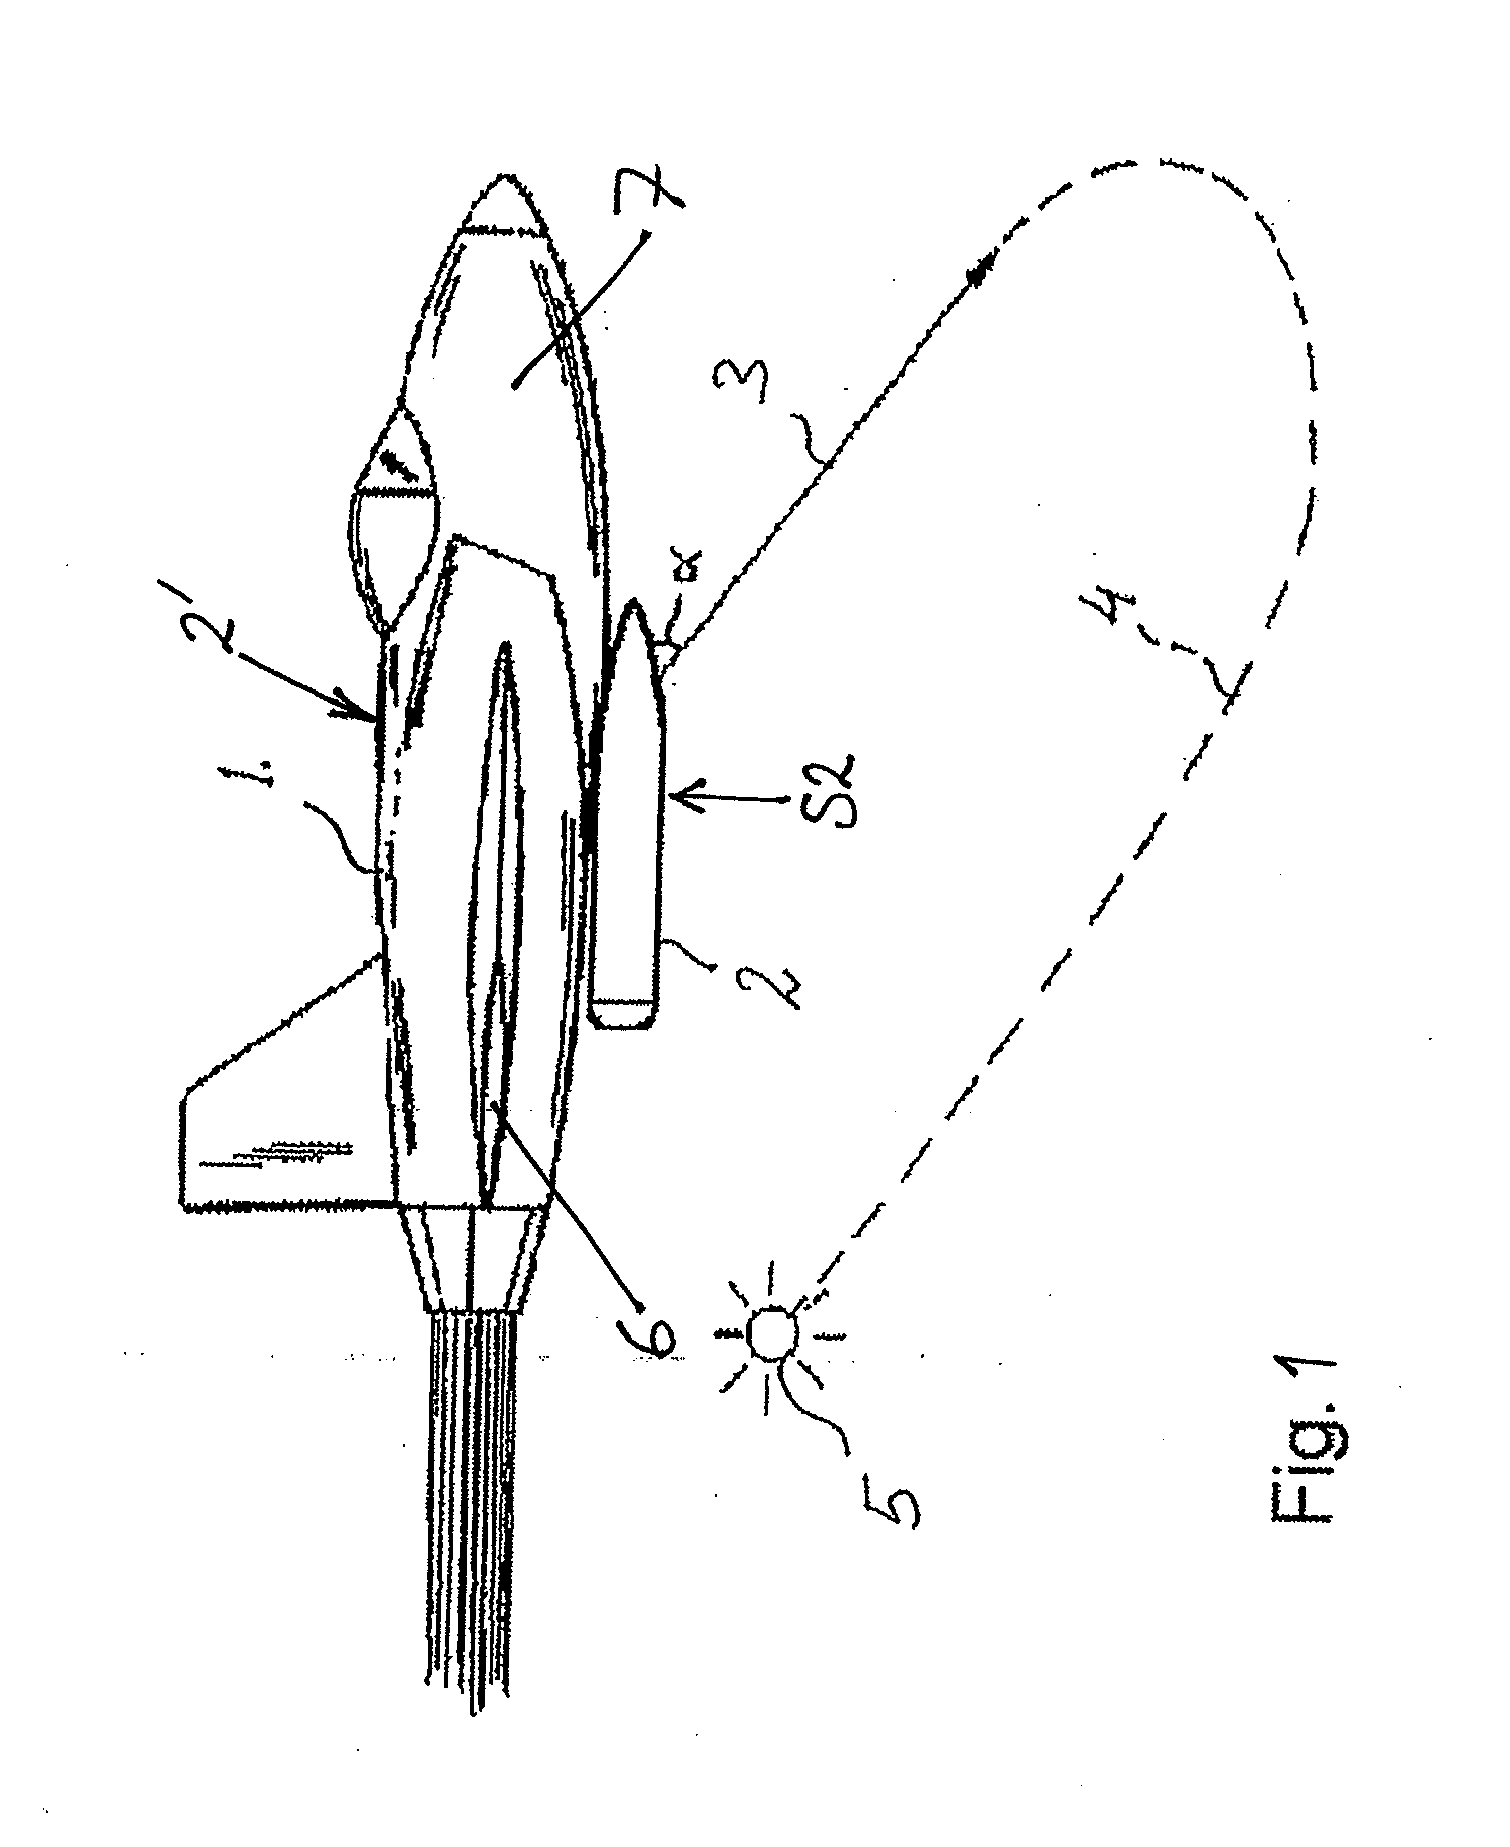 Arrangement for storing and launching payloads